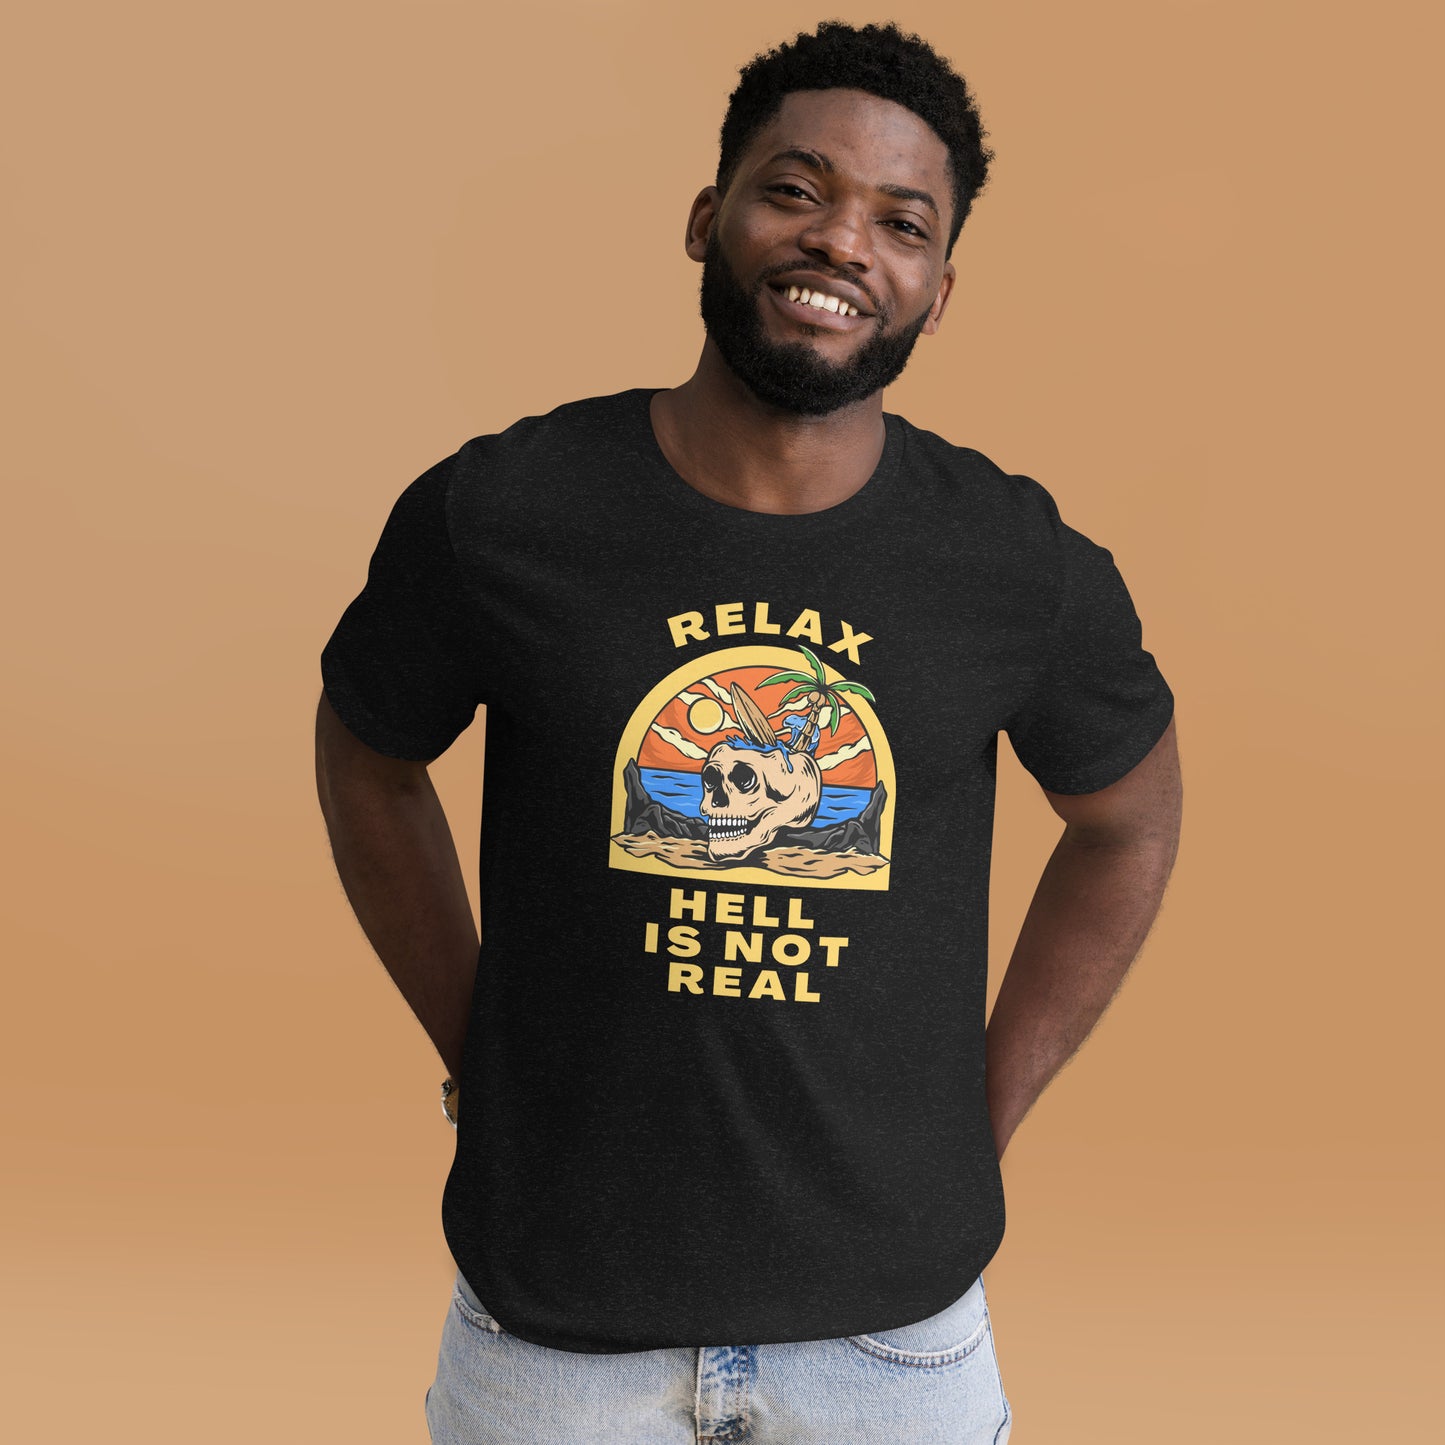 Relax! Hell is Not Real - Unisex t-shirt